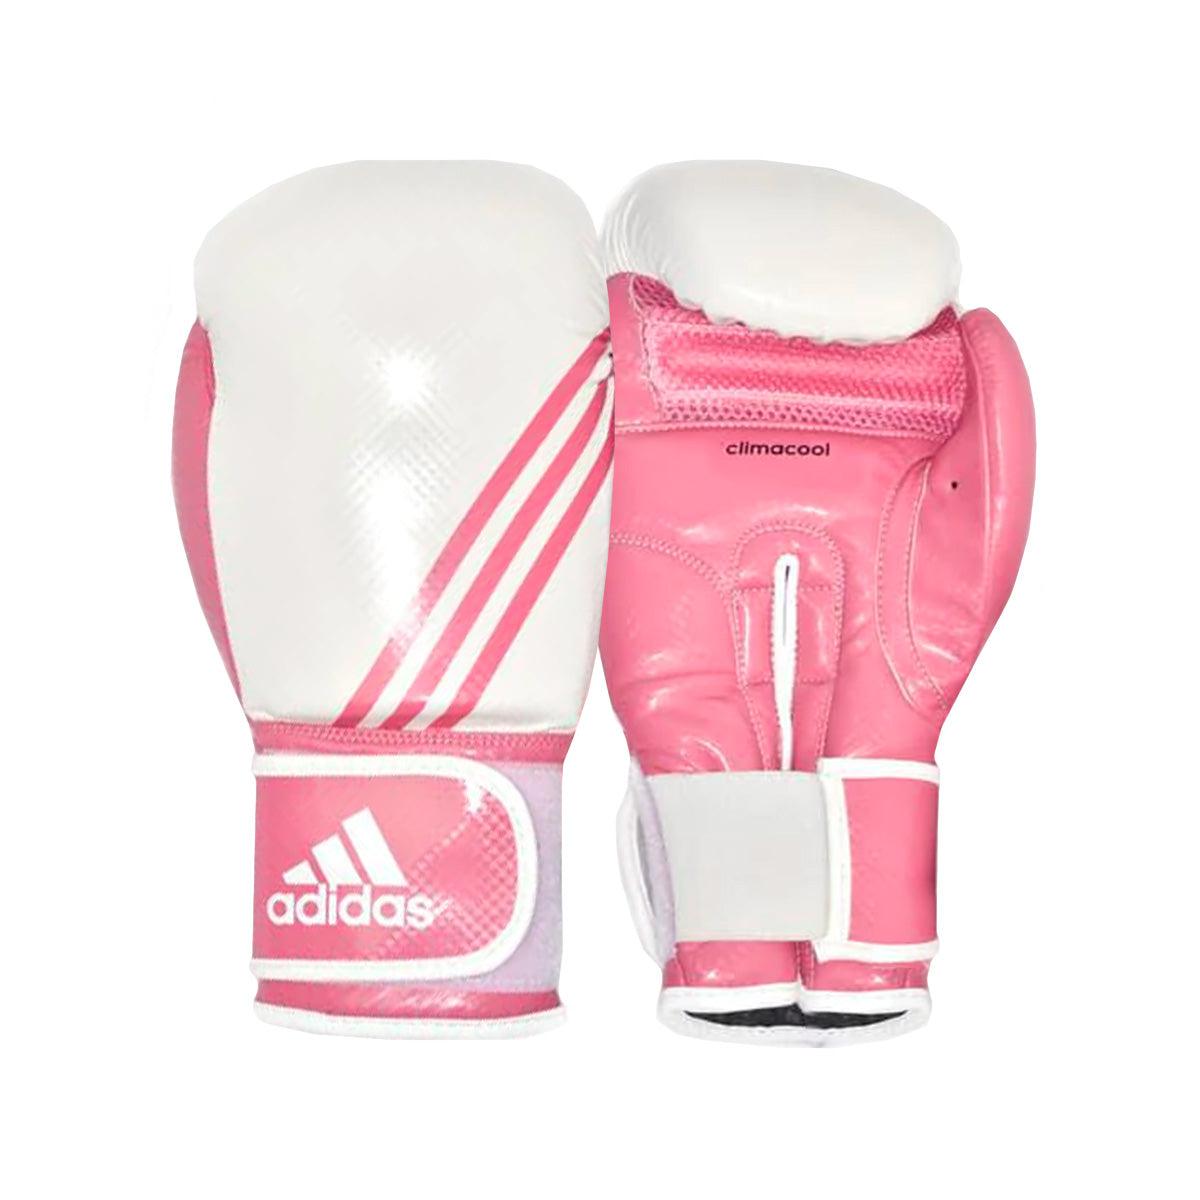 Adidas Boxing Gloves for Bag - Box-Fit Adidas® Boxing Gloves Canada Fighting